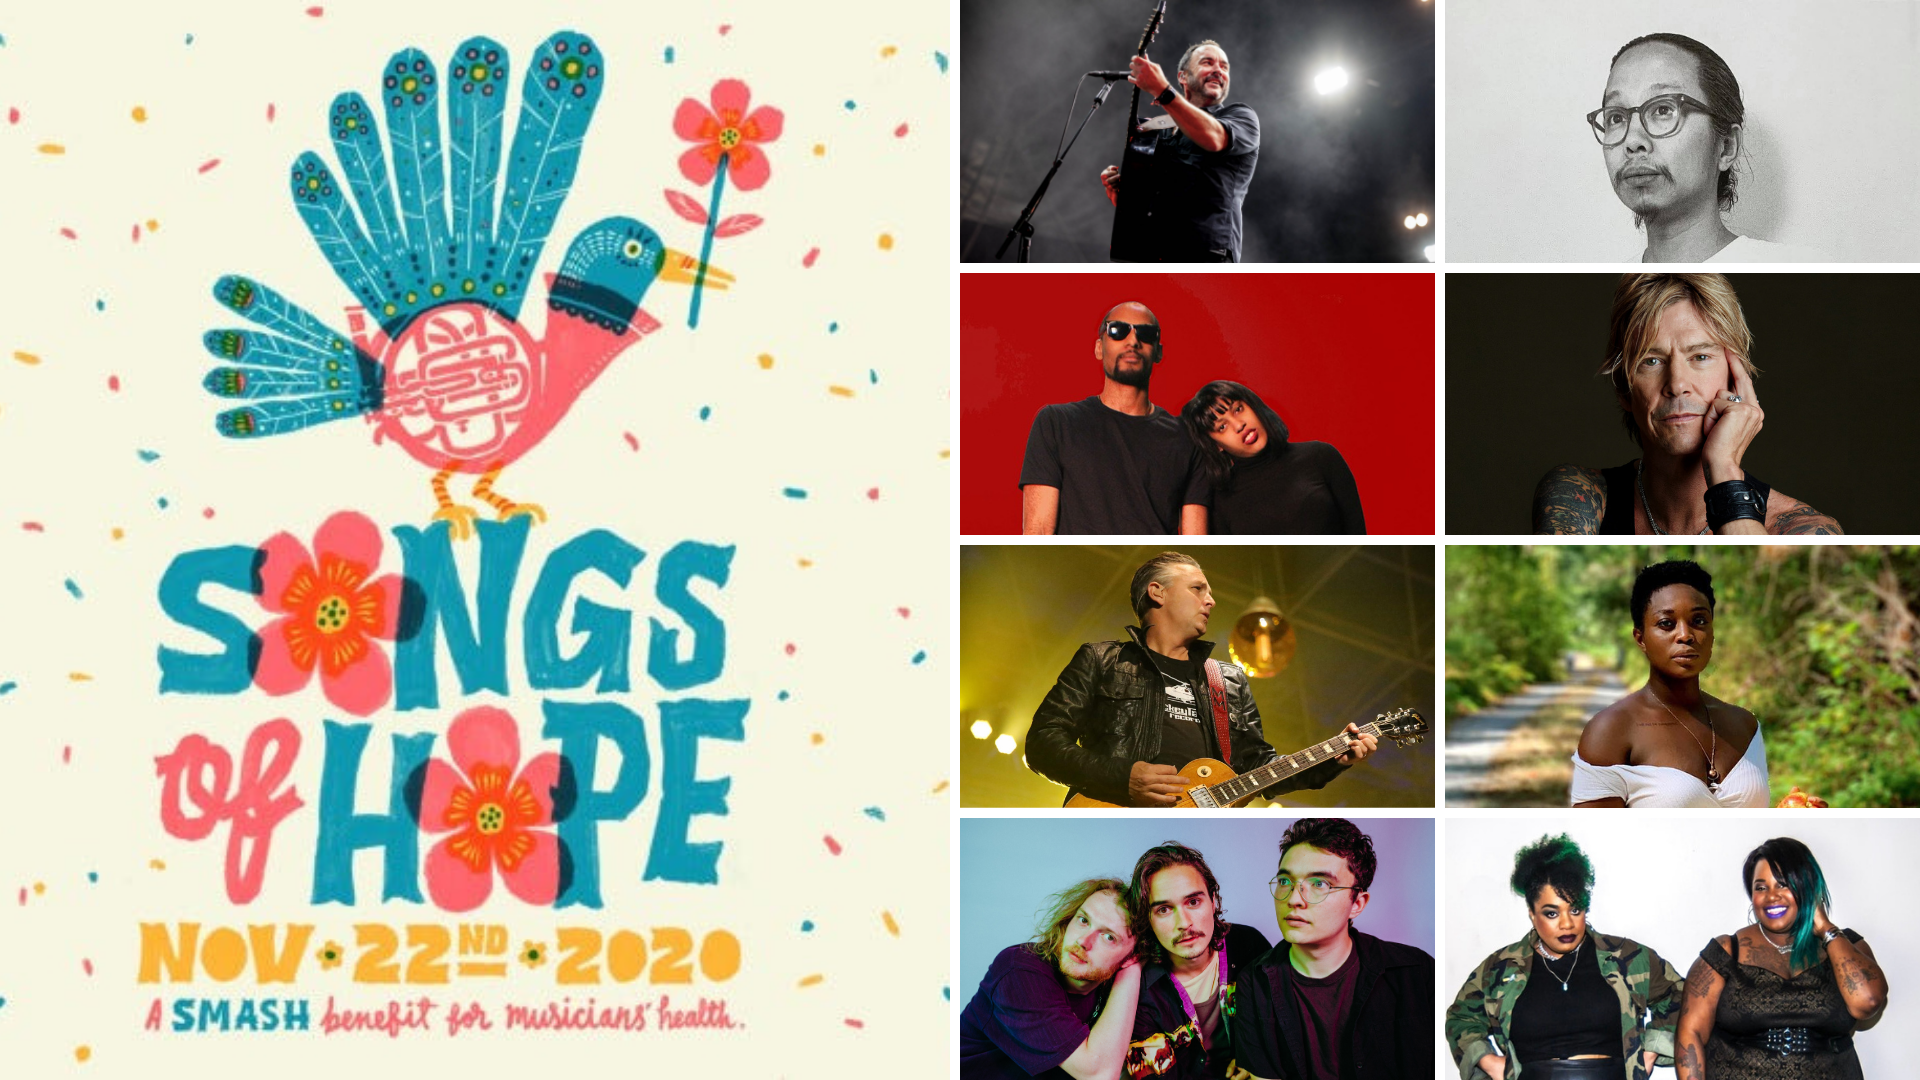 Kick down a few bucks for a good cause! Dave Matthews, Tomo Nakayama, Duff McKagan, The Head and Heart and more pitch in to fund healthcare for local musicians.